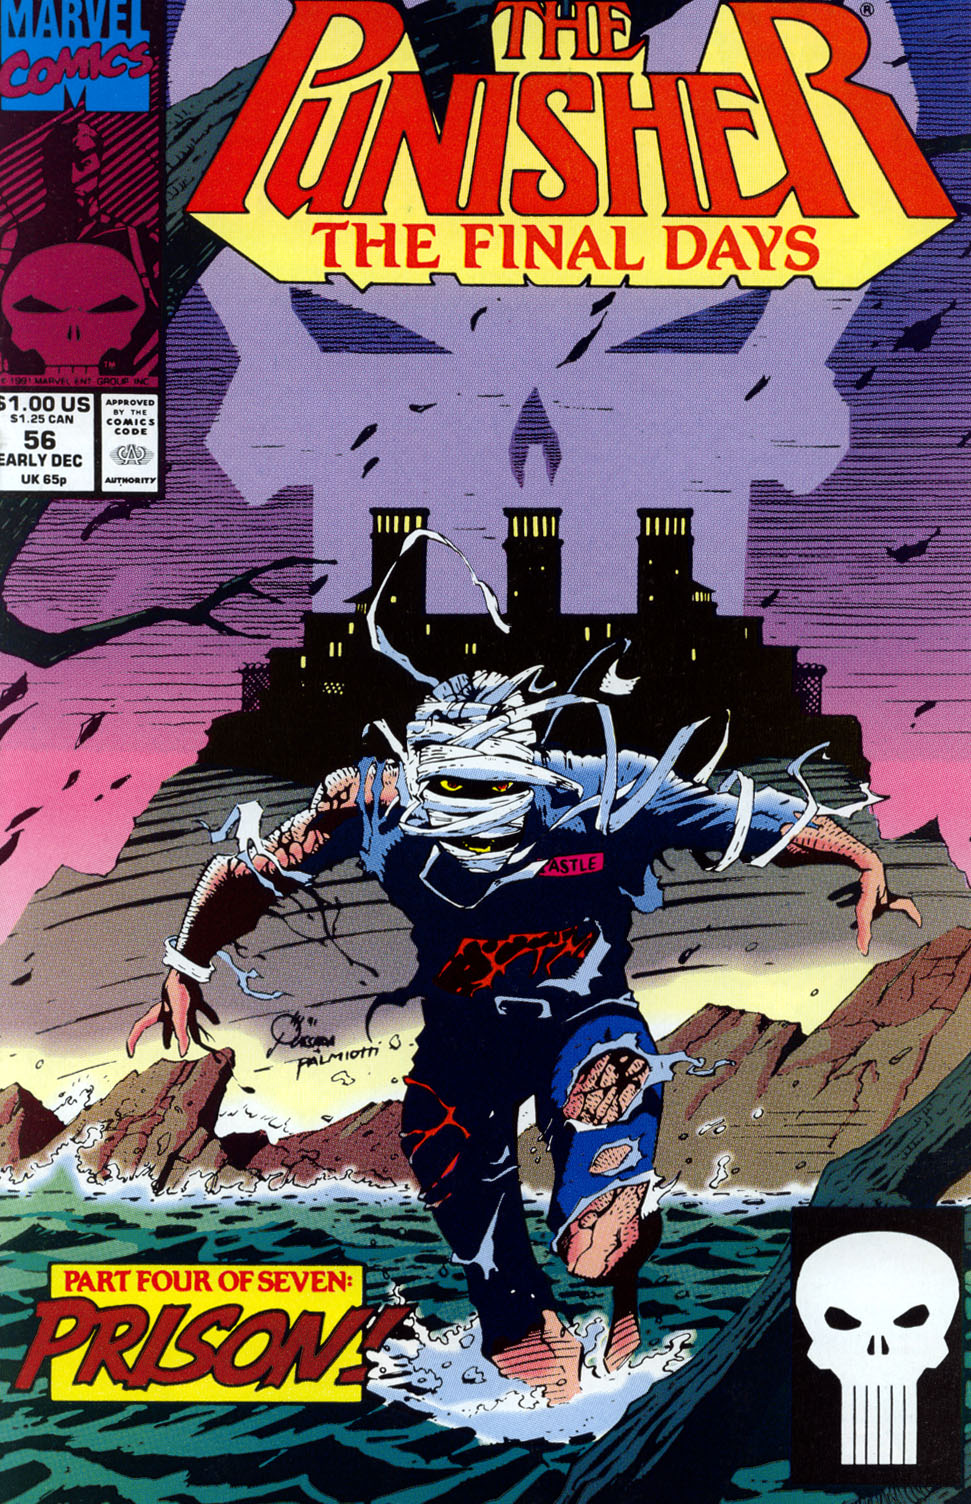 The Punisher (1987) Issue #56 - The Final Days #04 #63 - English 1